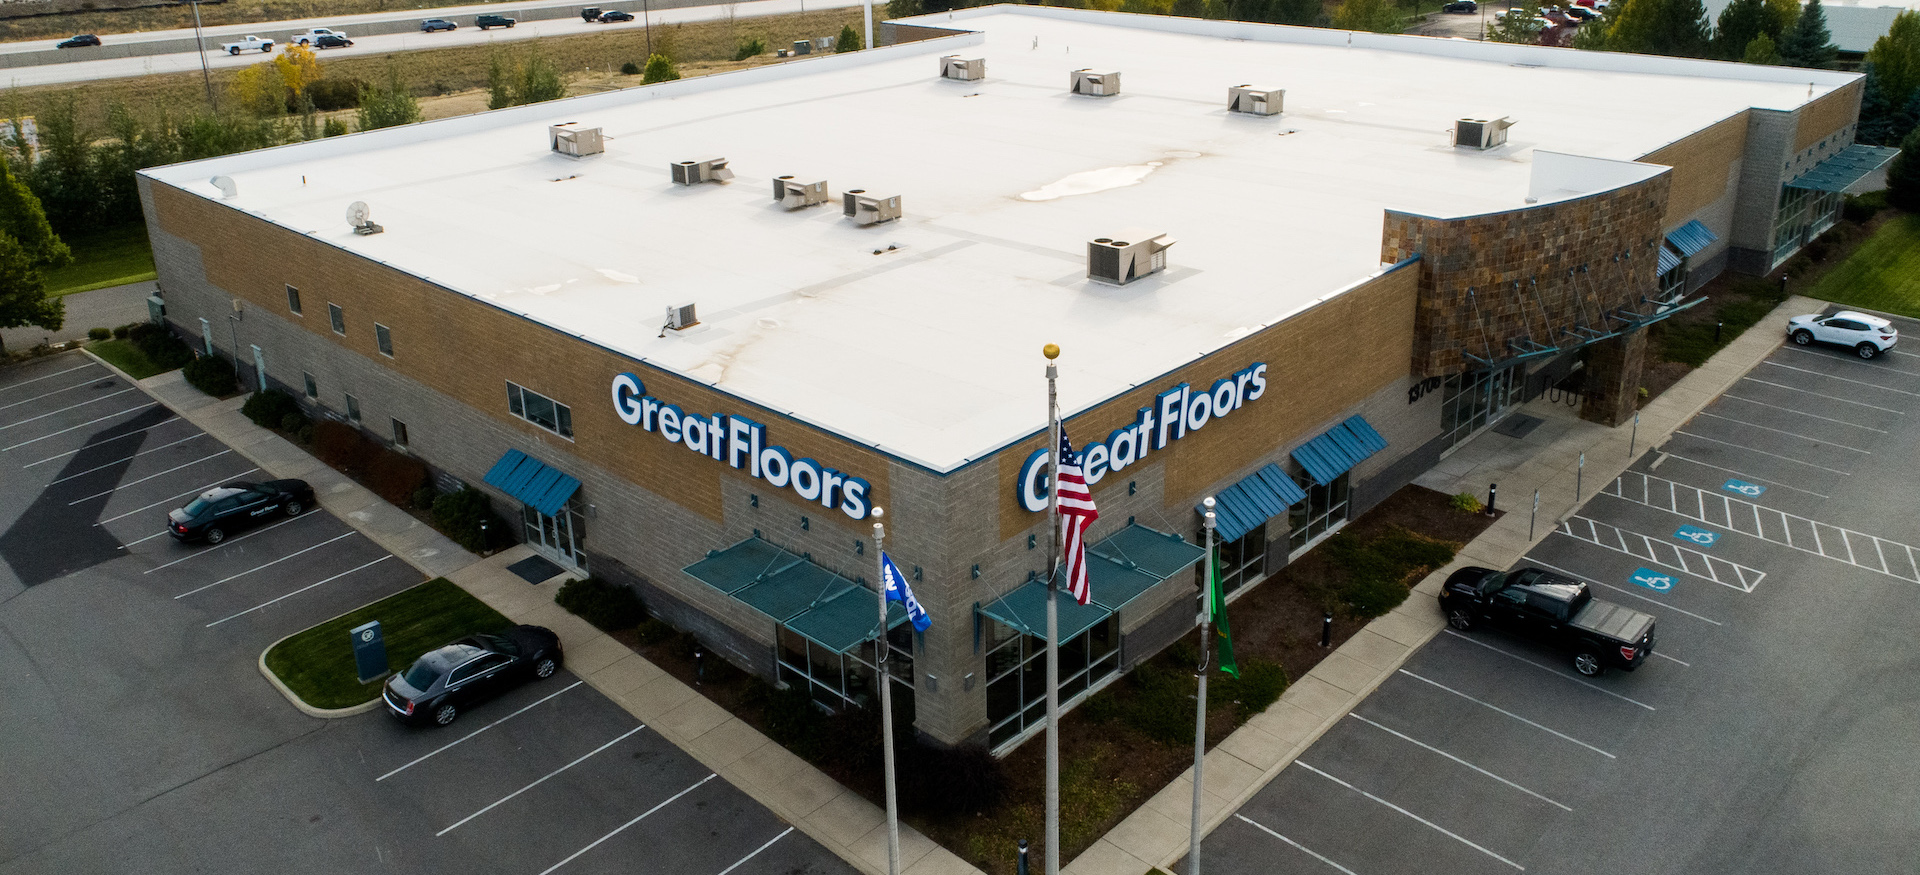 Great Floors Residential And Commercial Showroom Store Roof, Spokane Valley, Washington